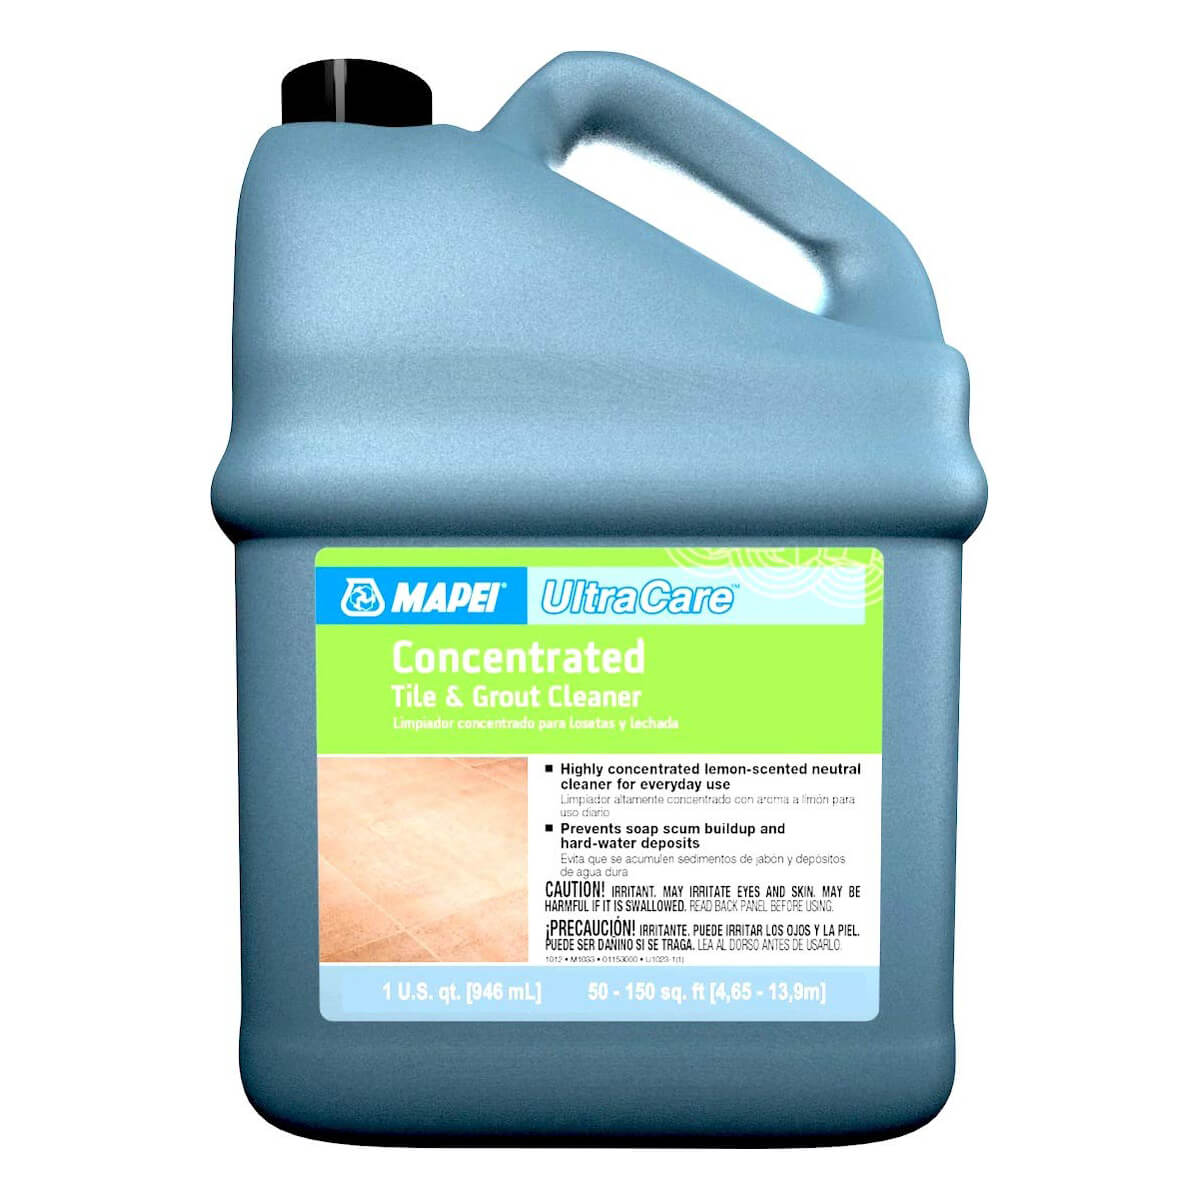 Mapei ITEM611241 UltraCare Concentrated Tile & Grout Cleaner - 1 Quarts